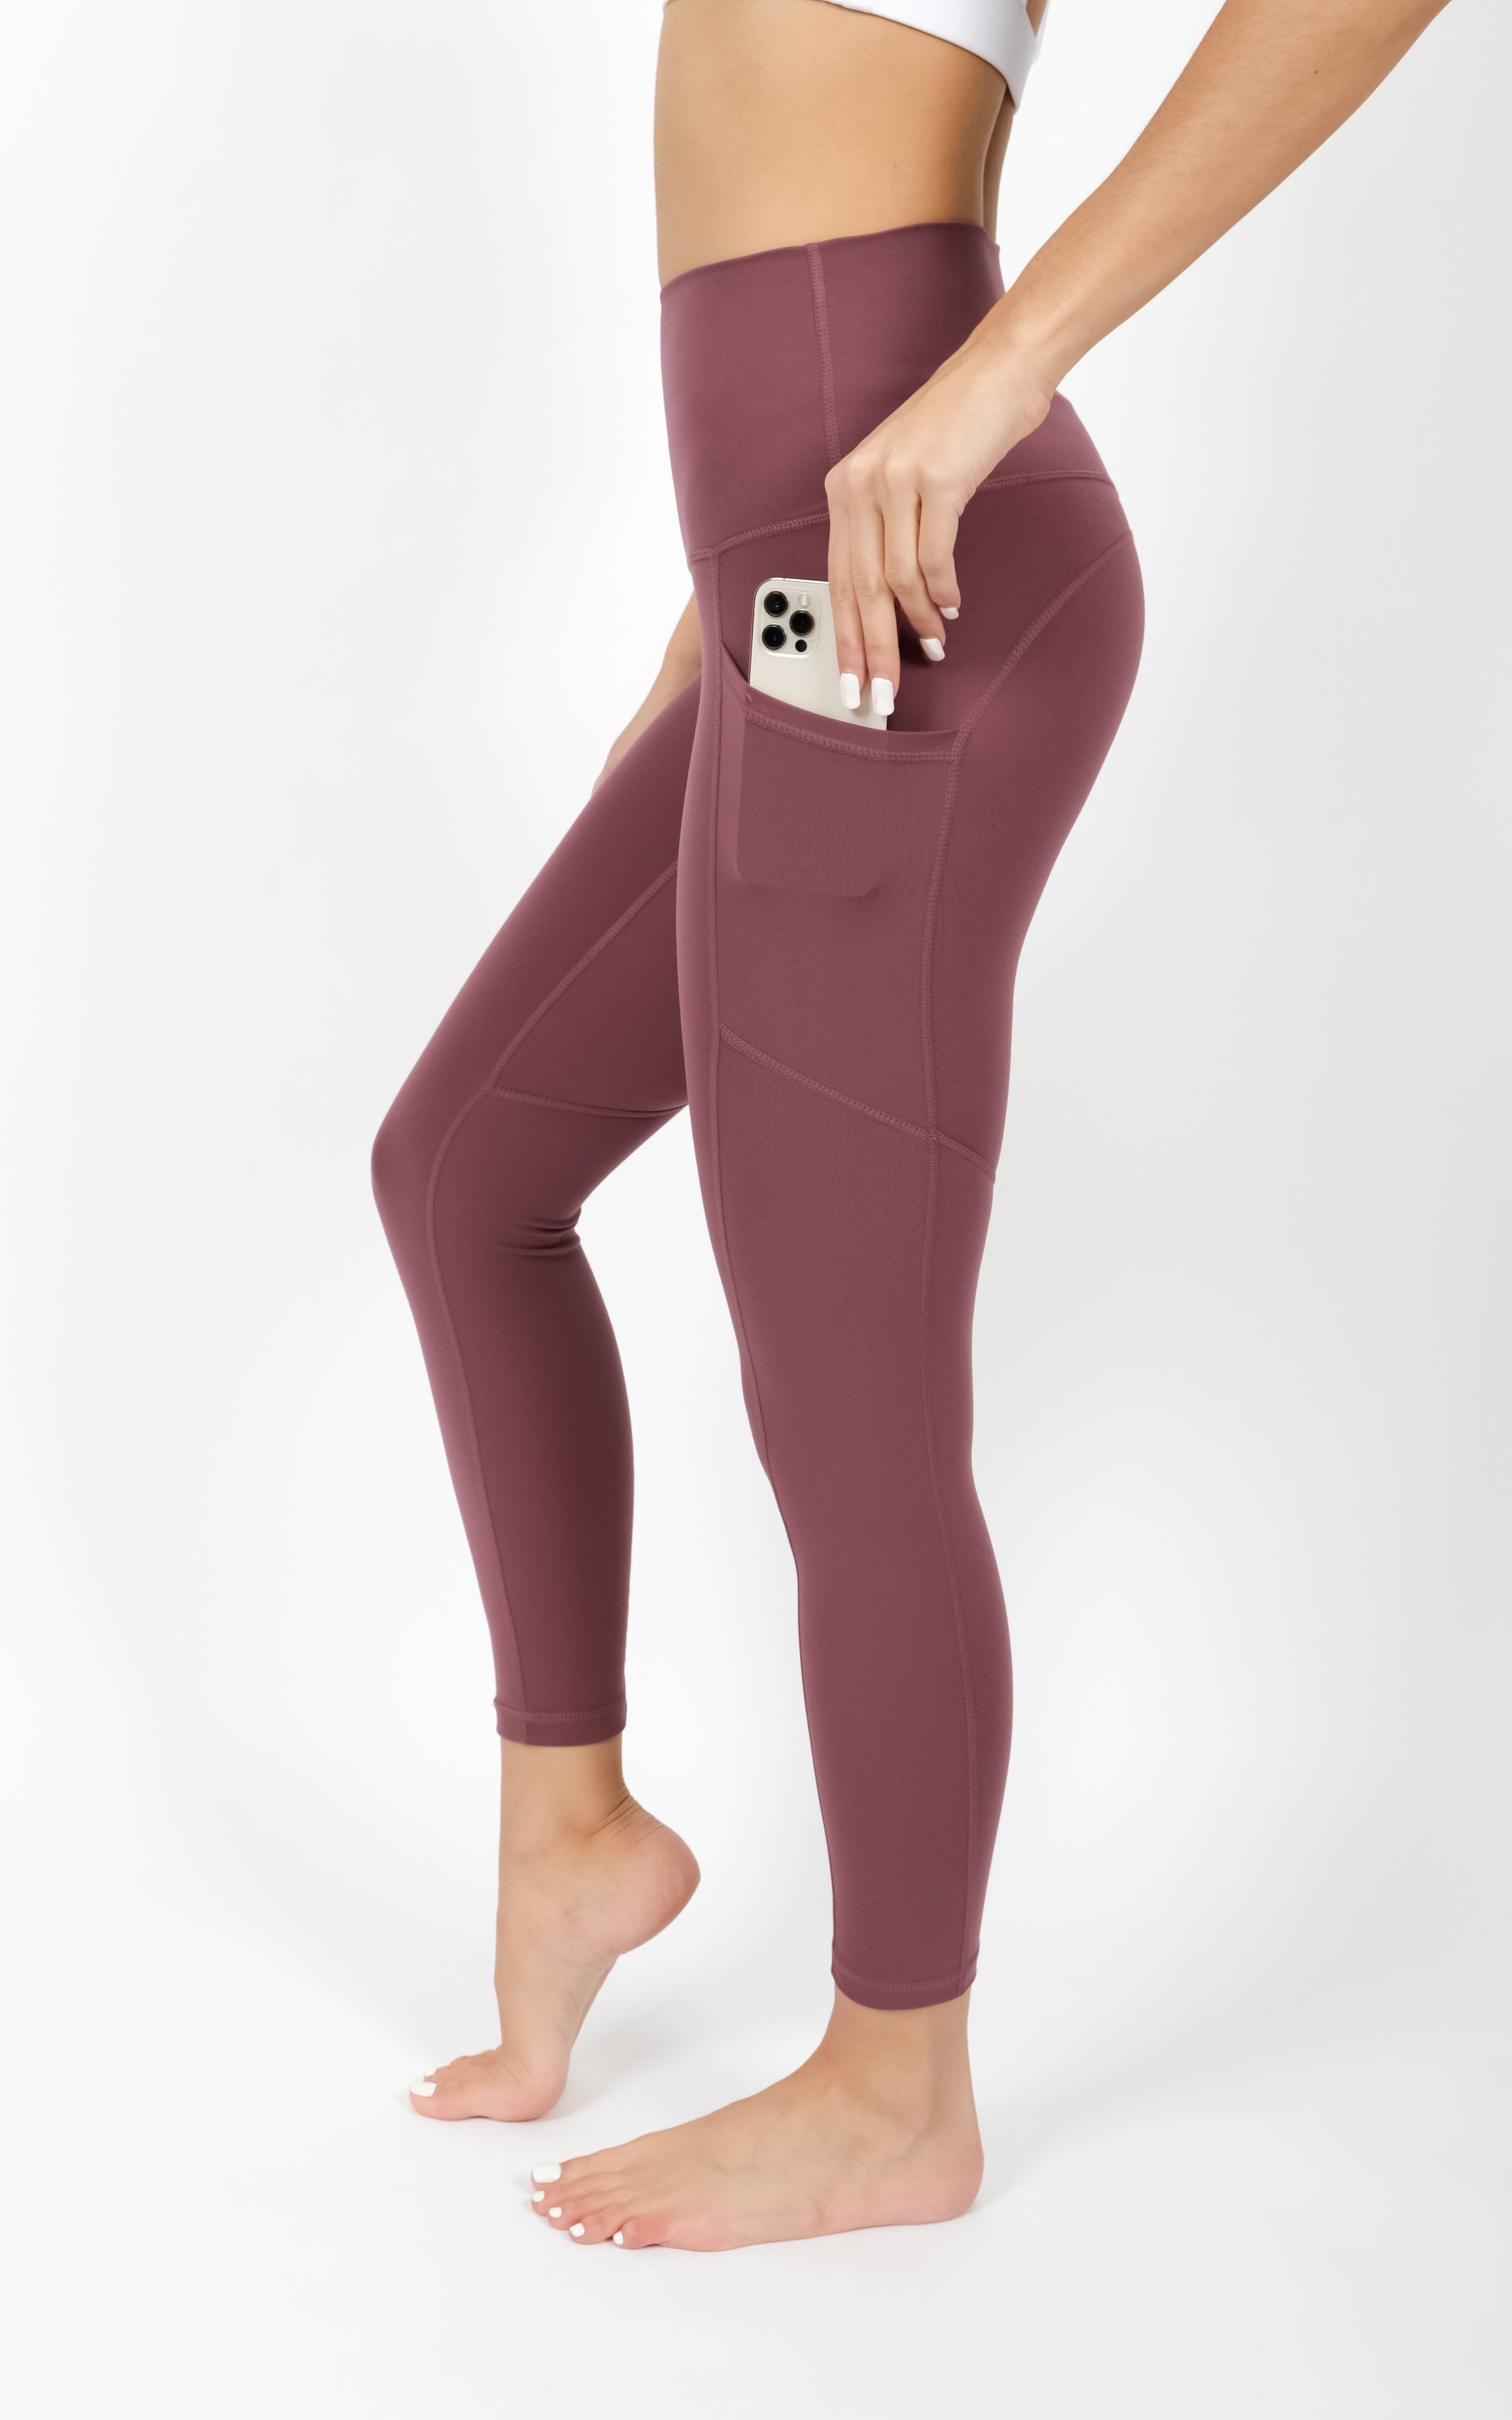 Are Yogalicious Leggings Good Morning  International Society of Precision  Agriculture